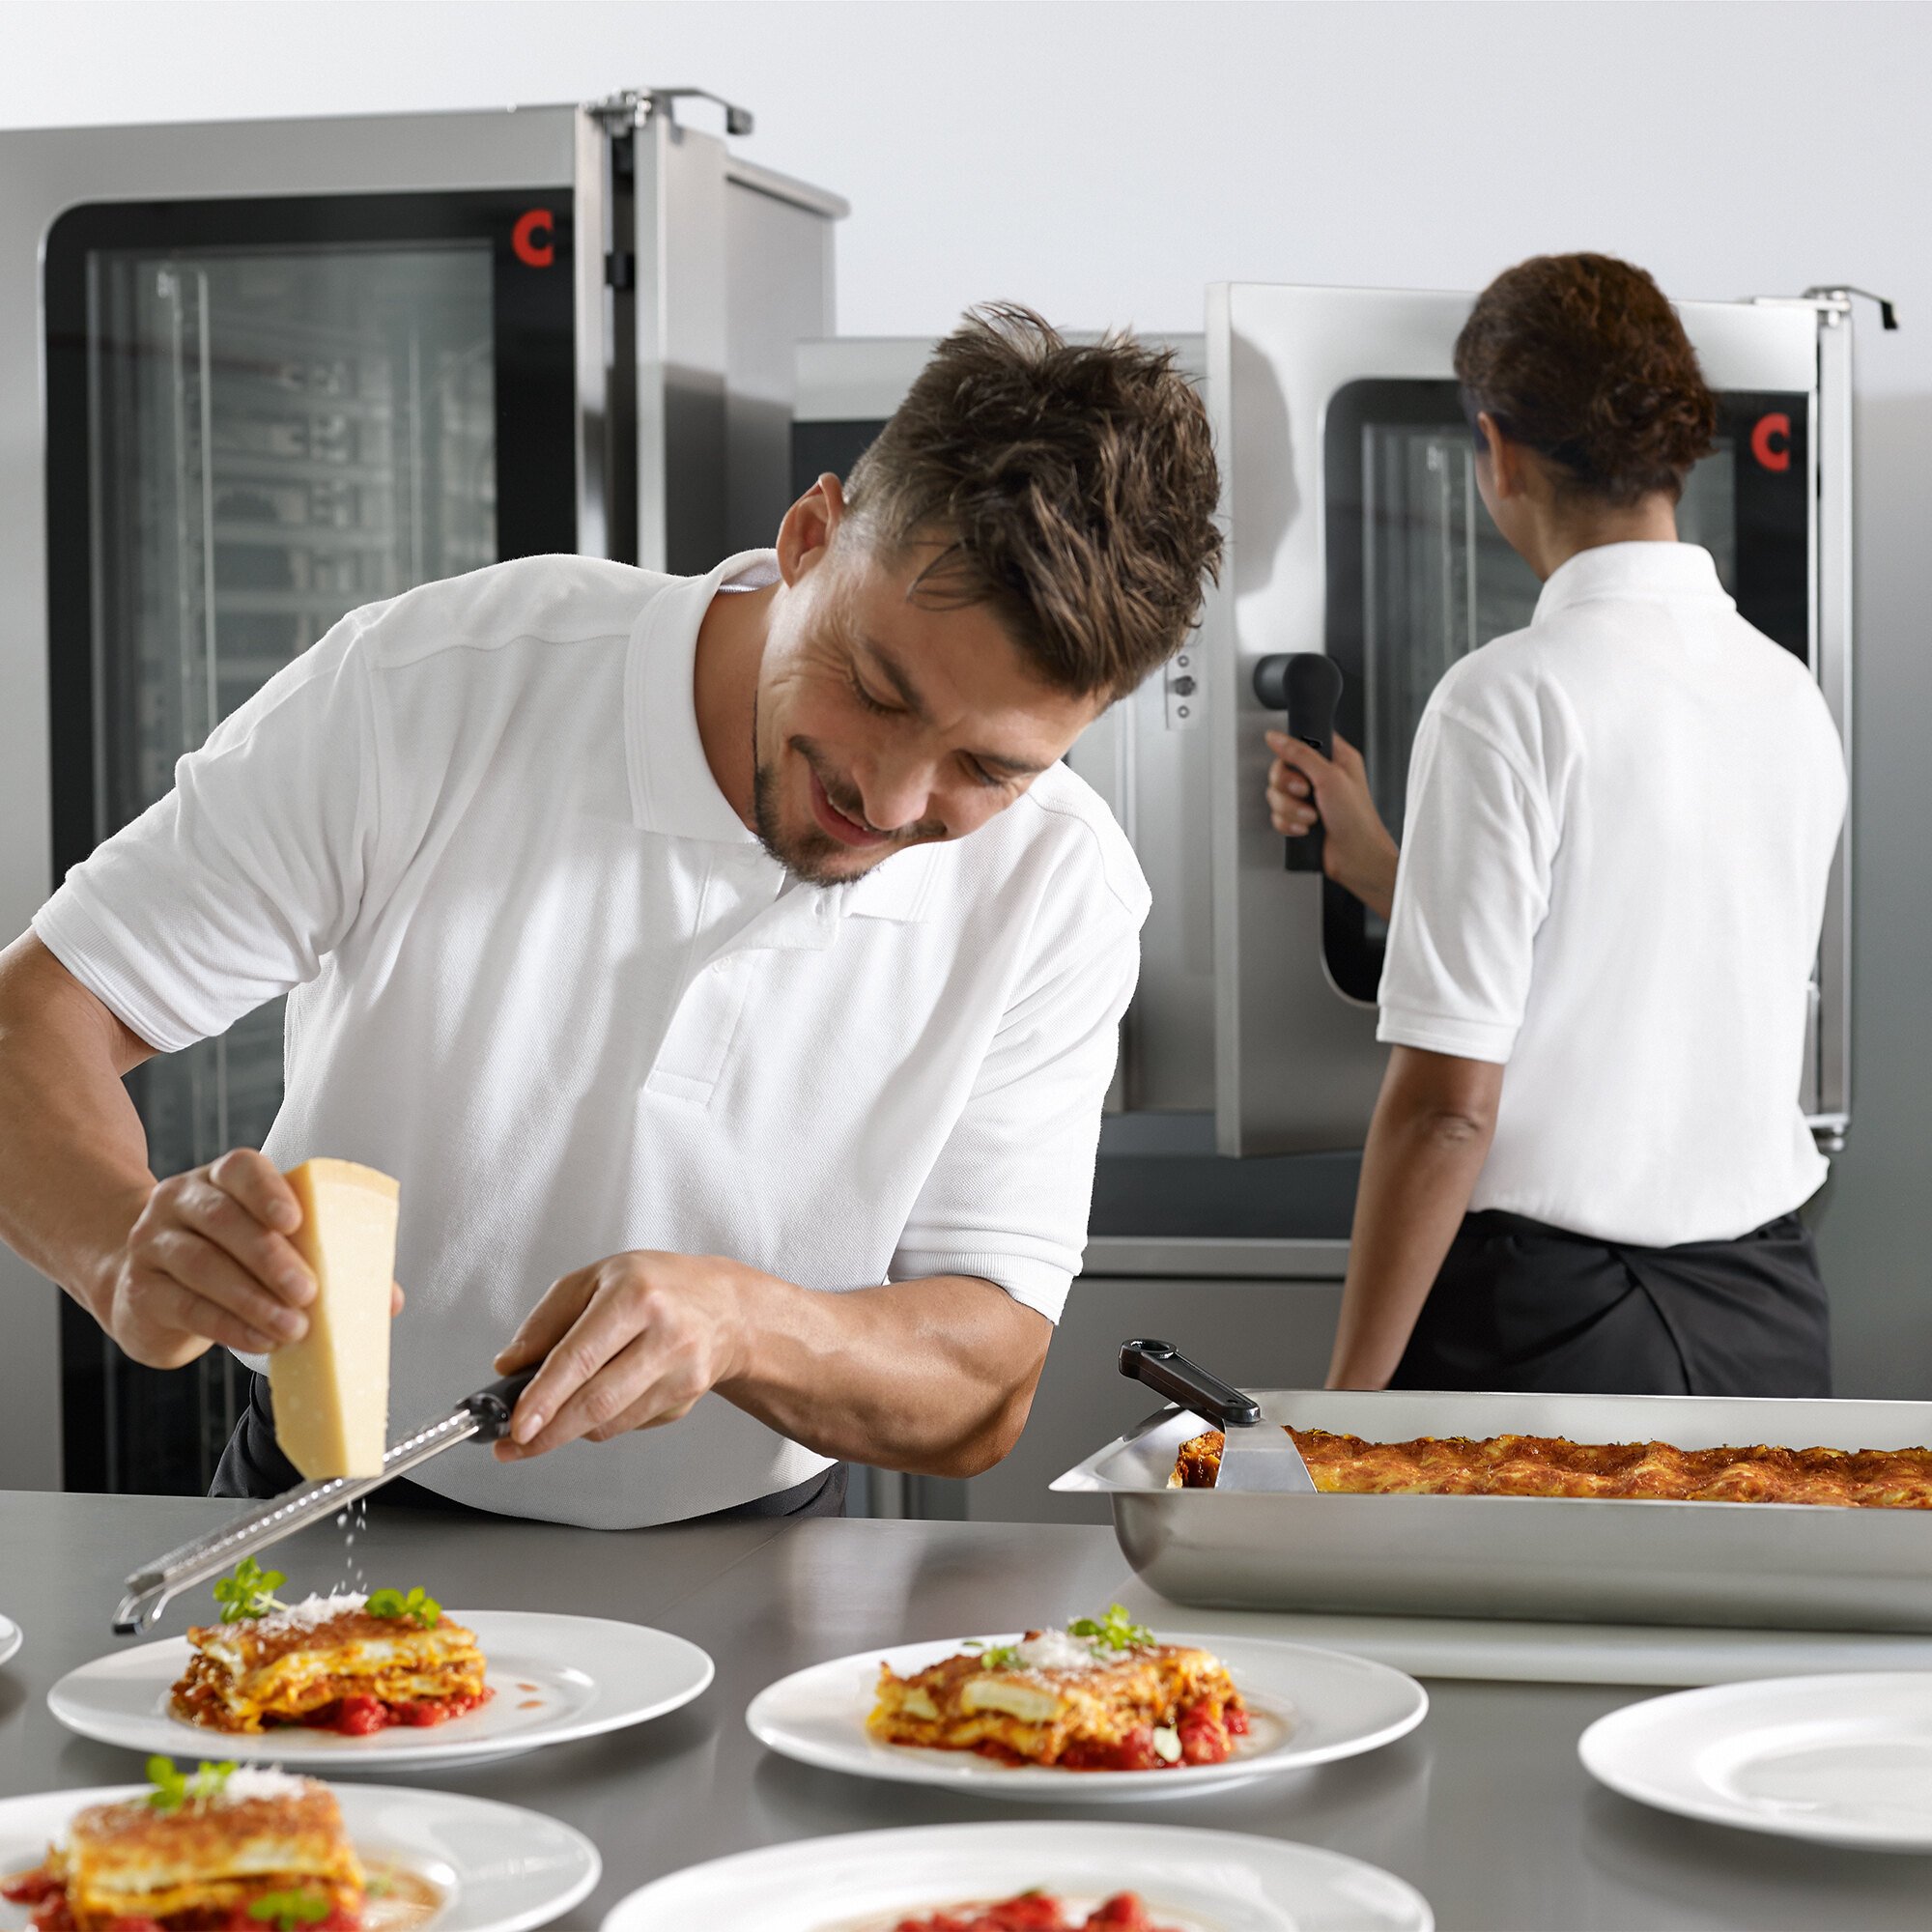 5 Reasons Why A Combi Steam Oven May Not Be The Right Choice For You